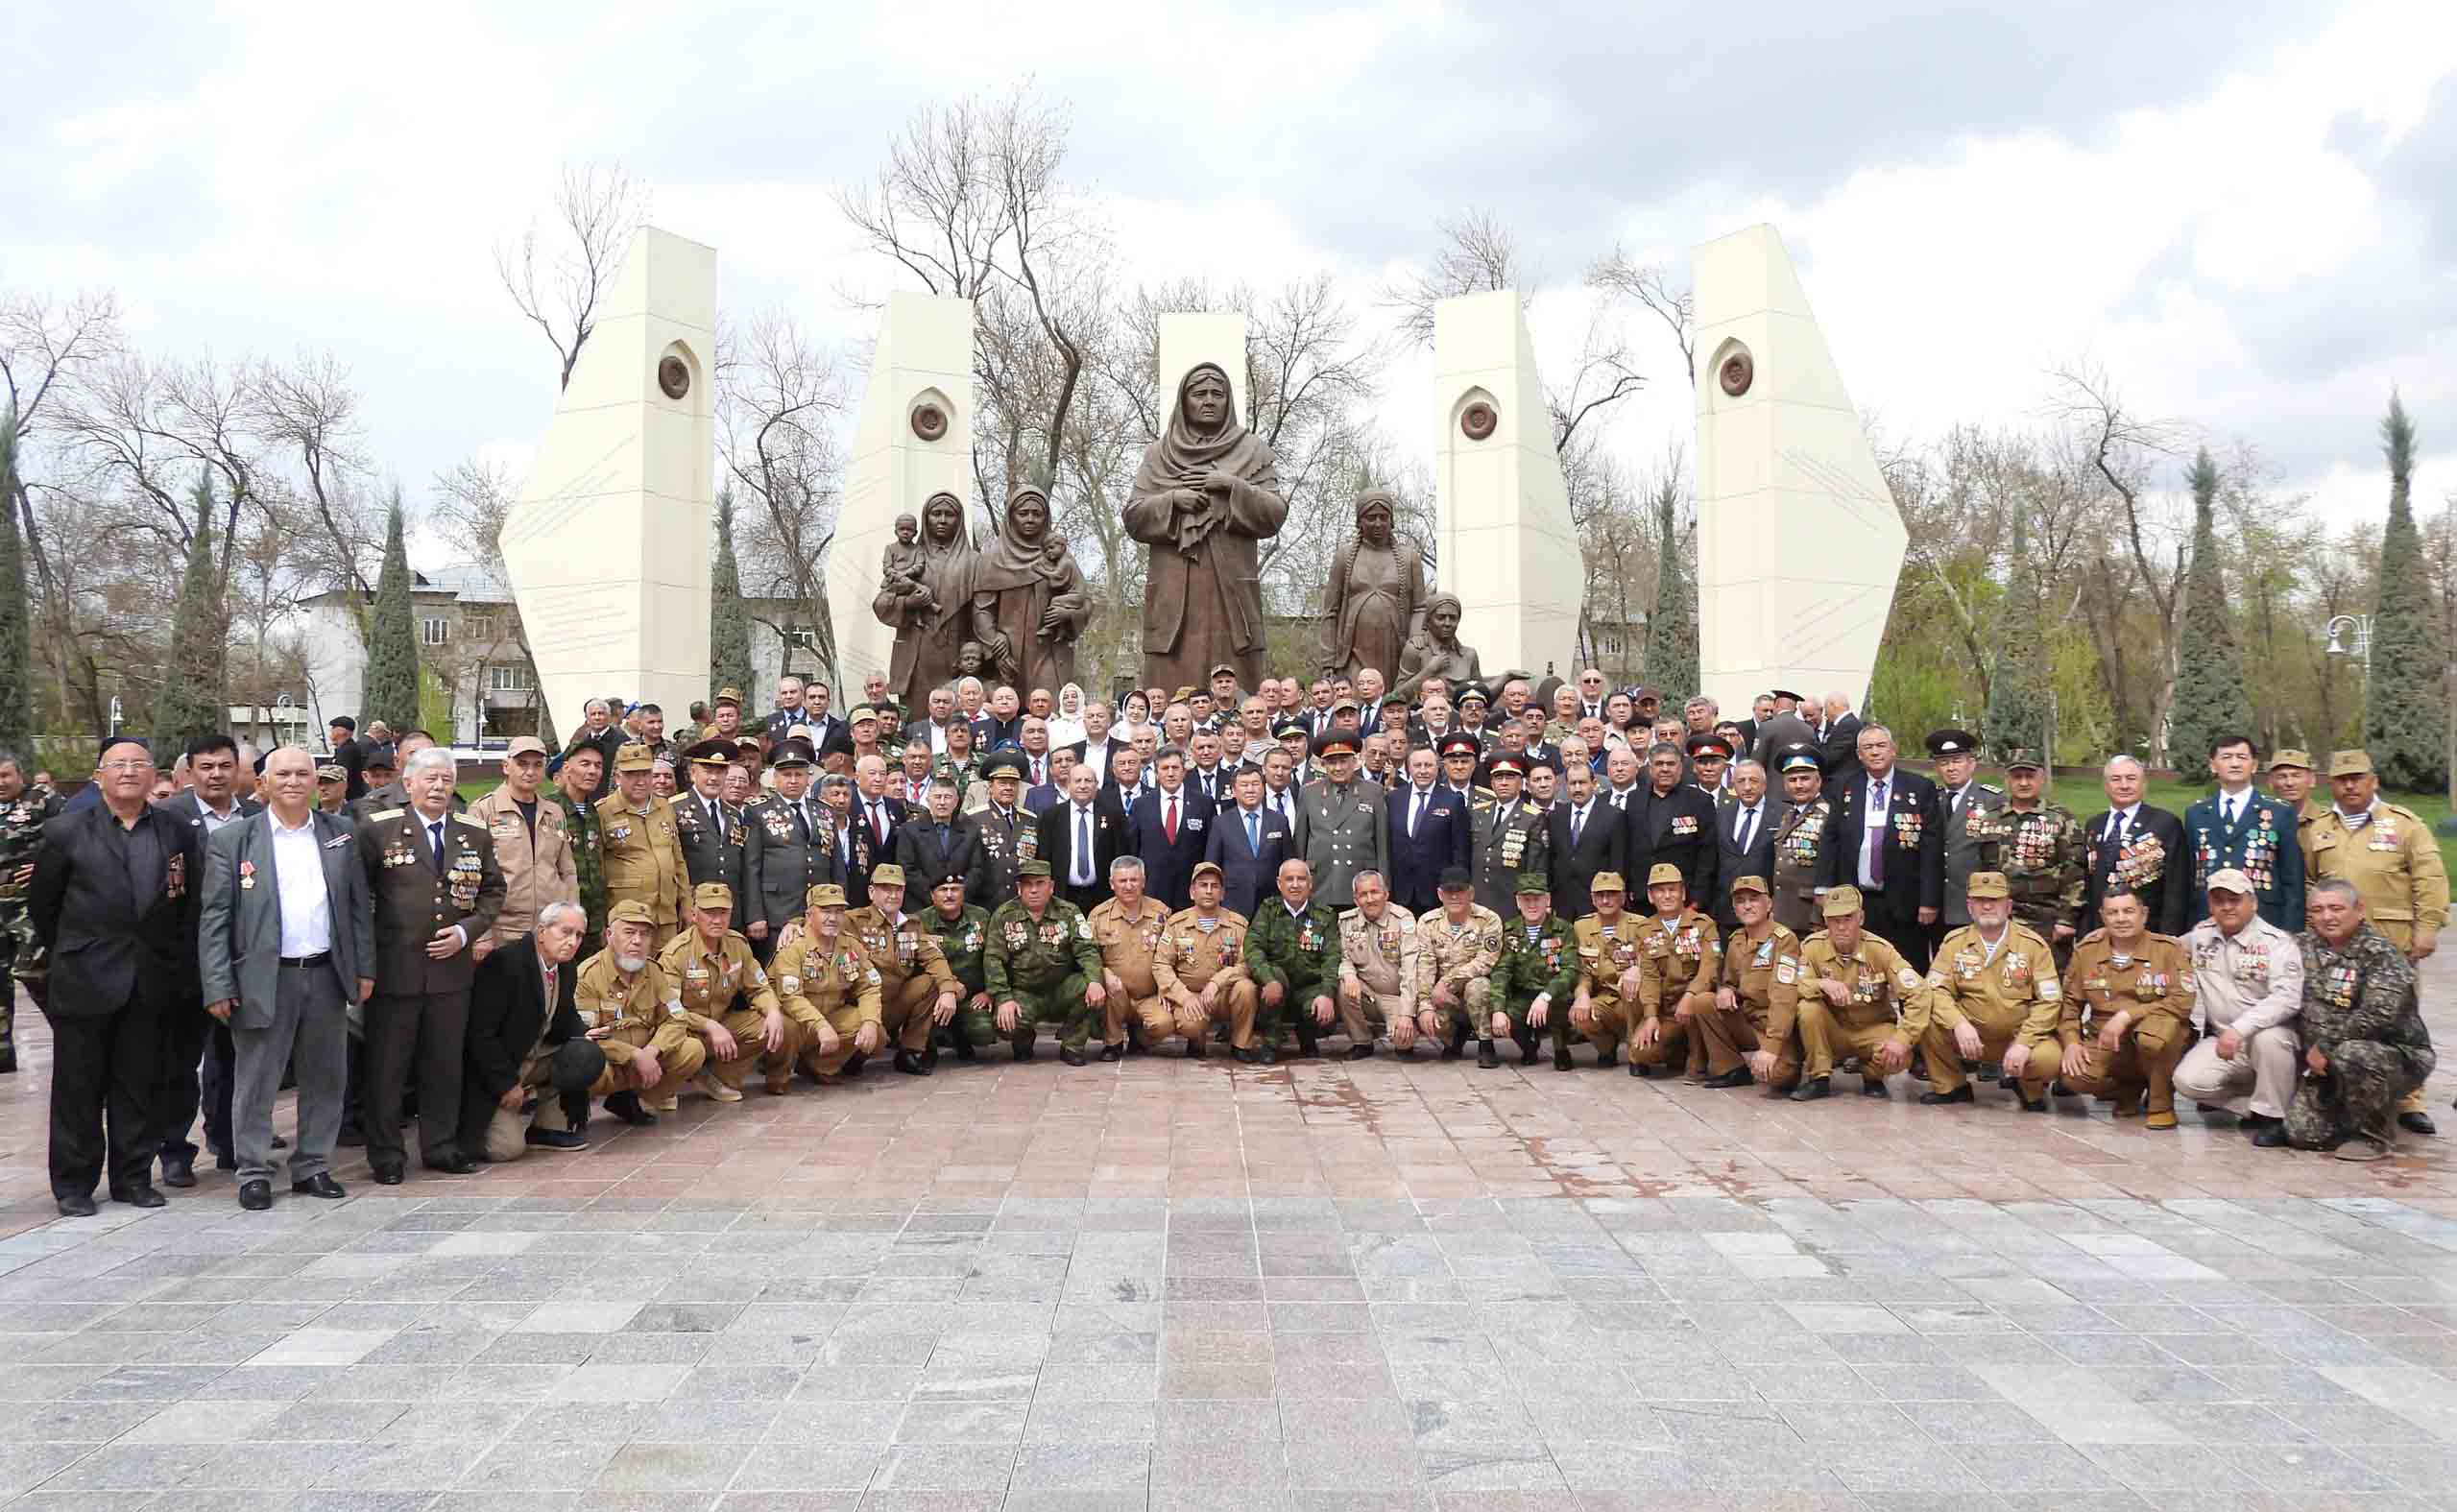 In connection with the 30th anniversary of the formation of the Uzbek association of veteran soldiers and the disabled, a solemn event was held at the Victory Park memorial complex